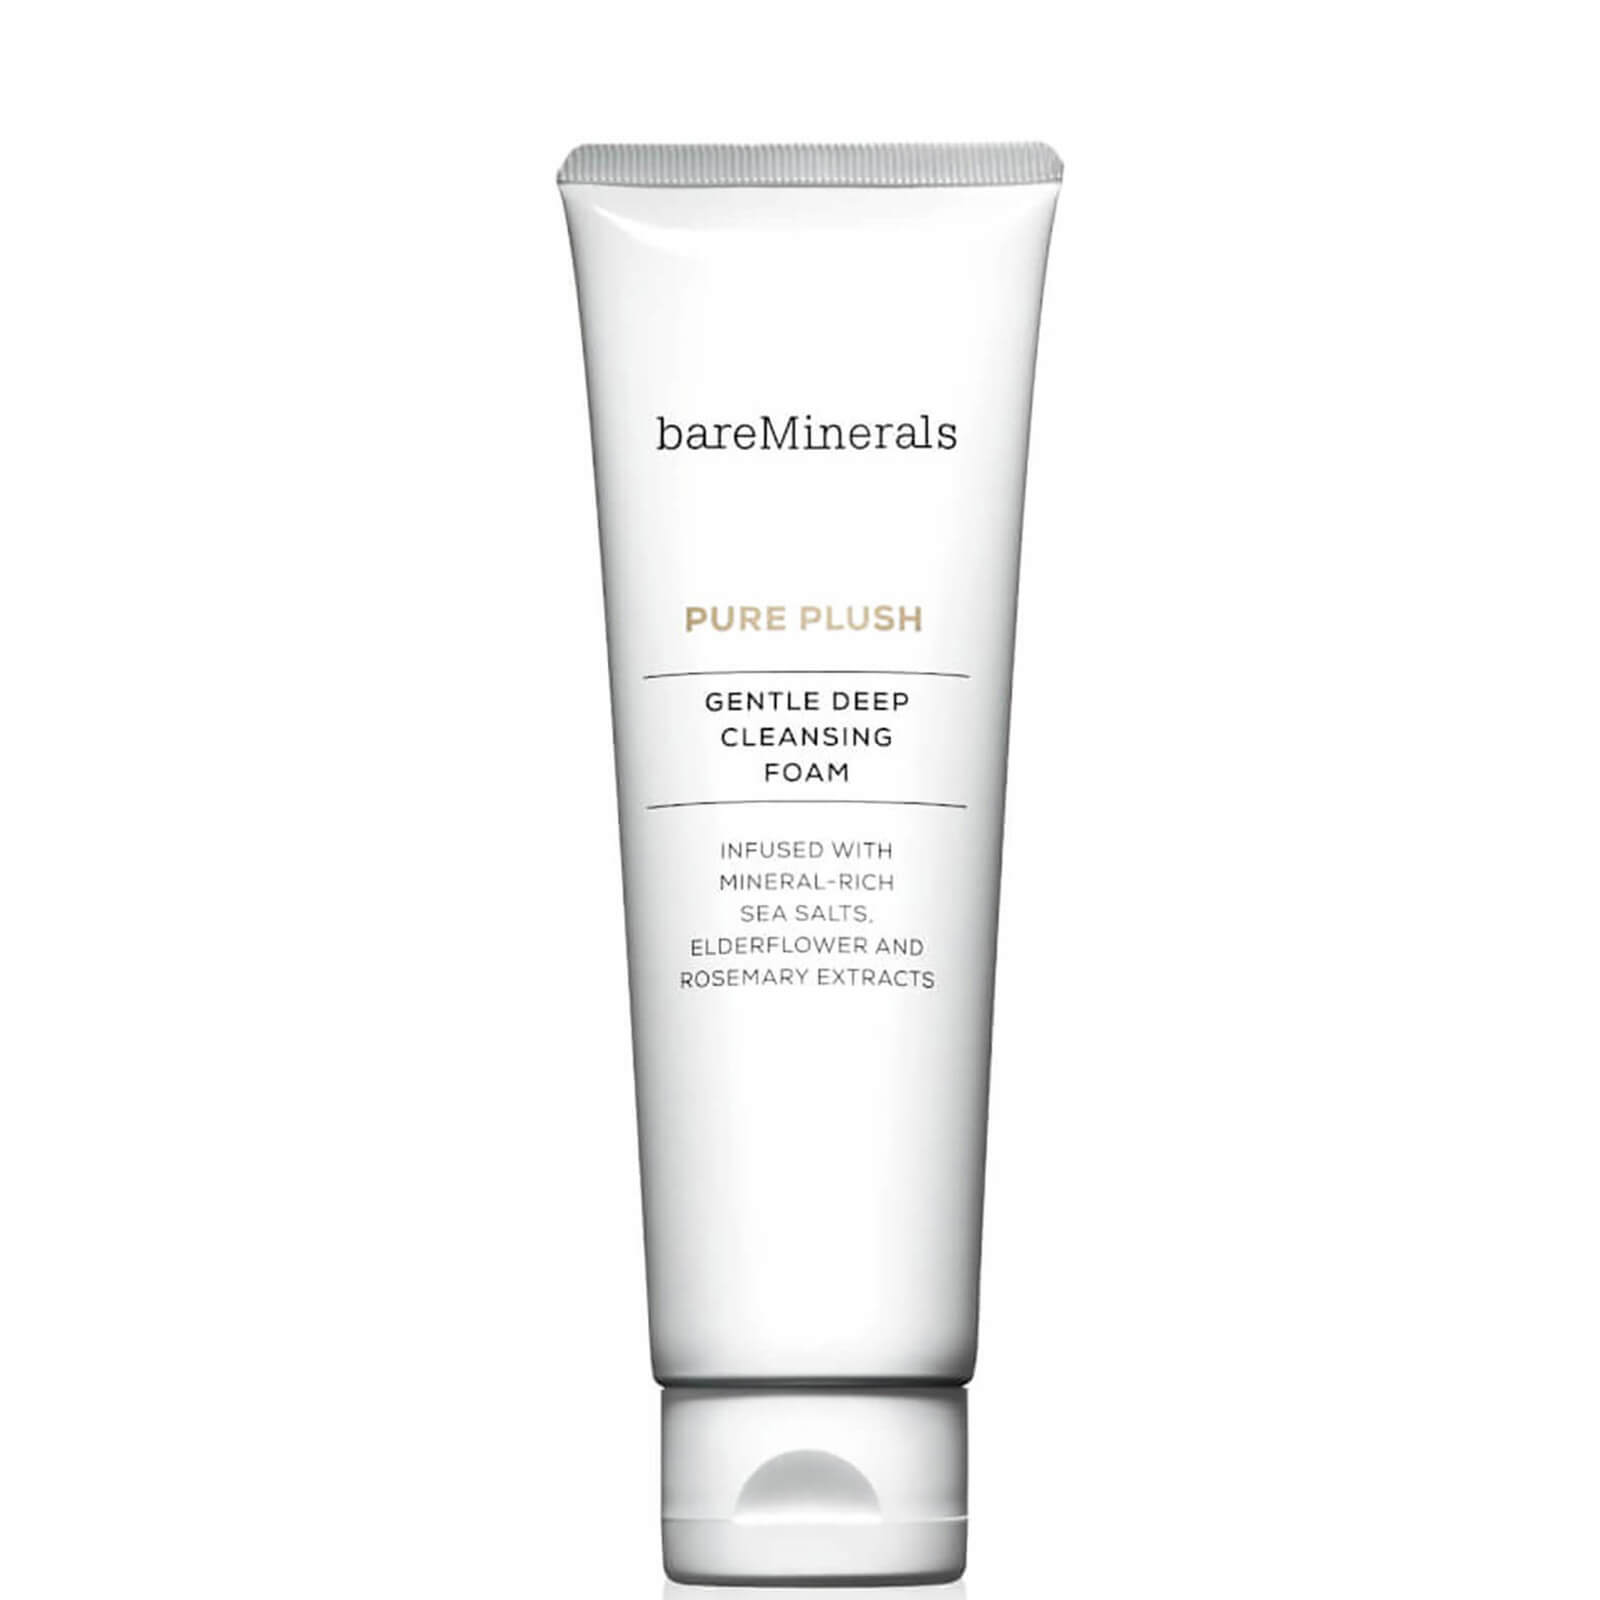 Photos - Facial / Body Cleansing Product bareMinerals Pure Plush Cleansing Foam 78846 